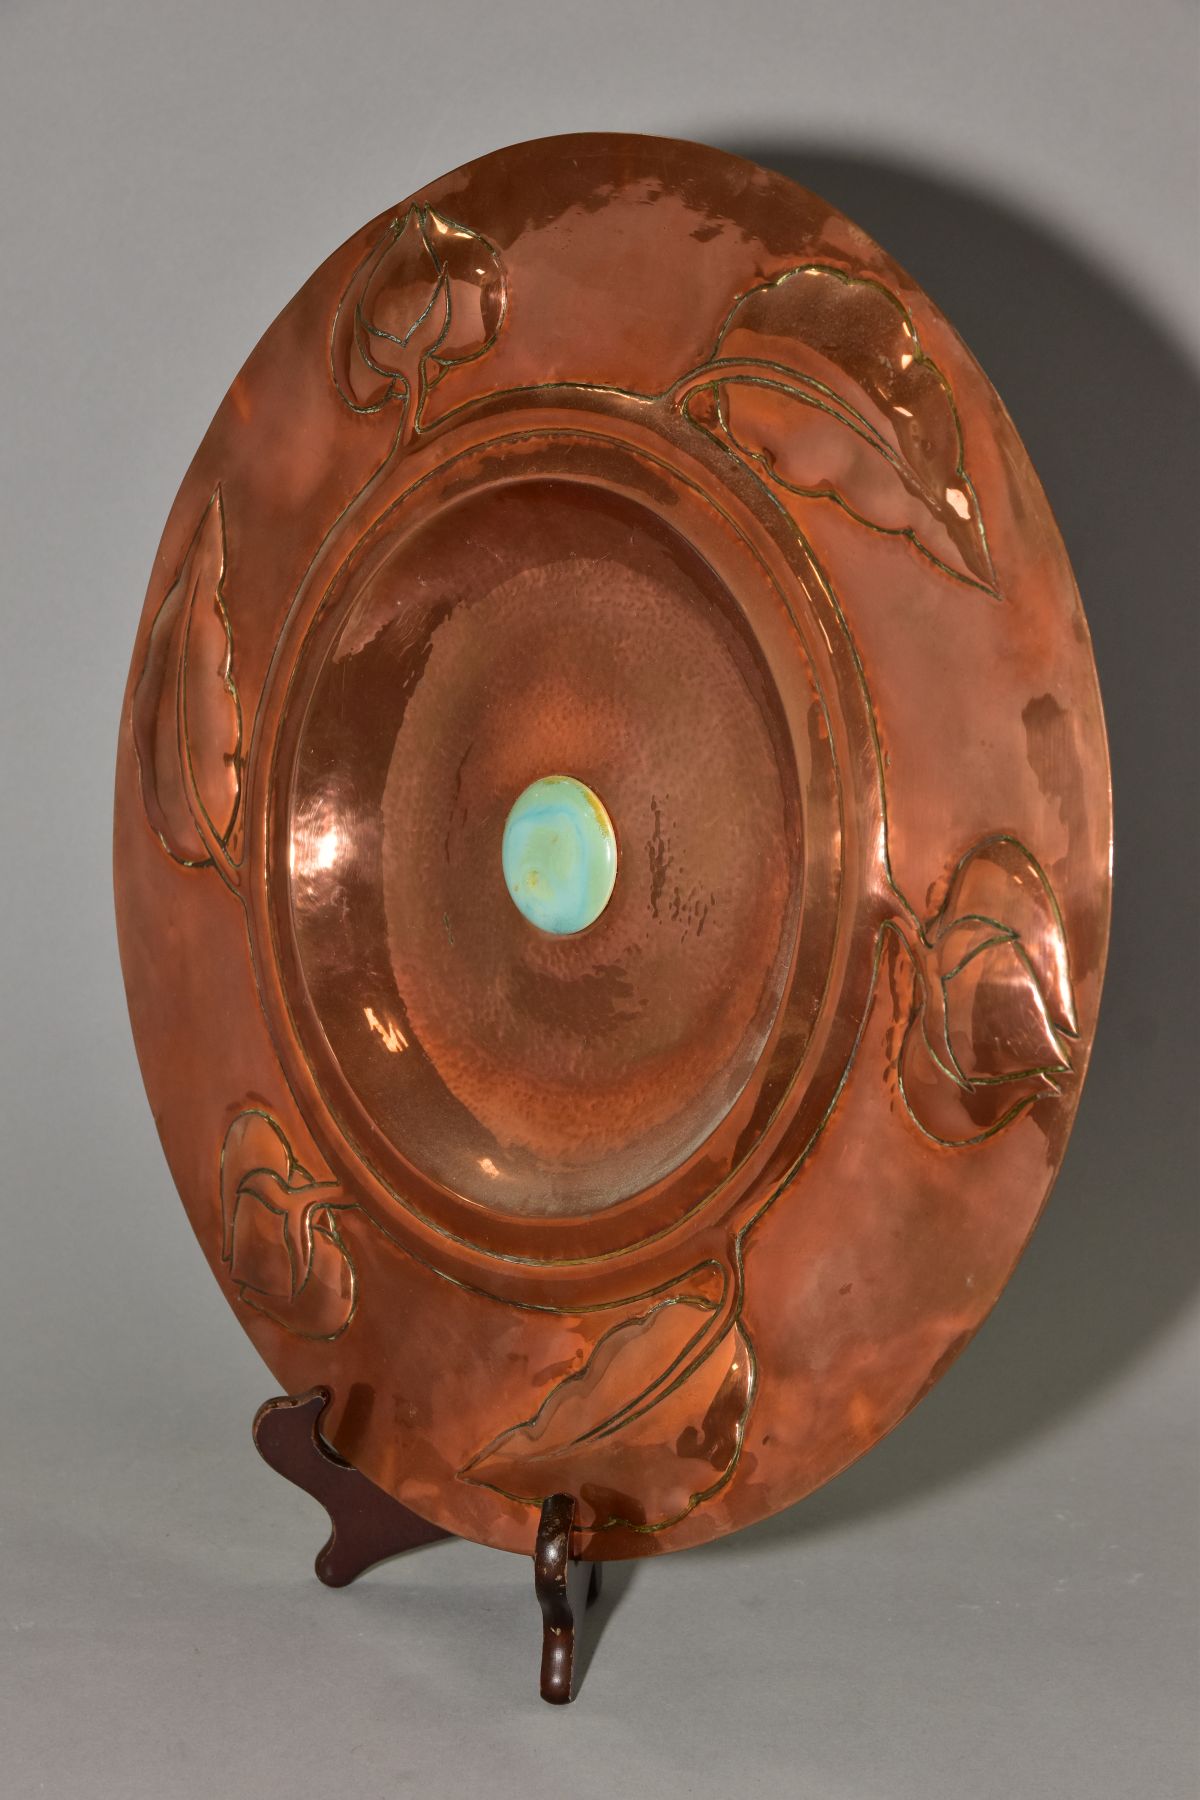 AN ARTS AND CRAFTS STYLE COPPER CHARGER, embossed with a band of foliate motifs, the central - Image 4 of 8